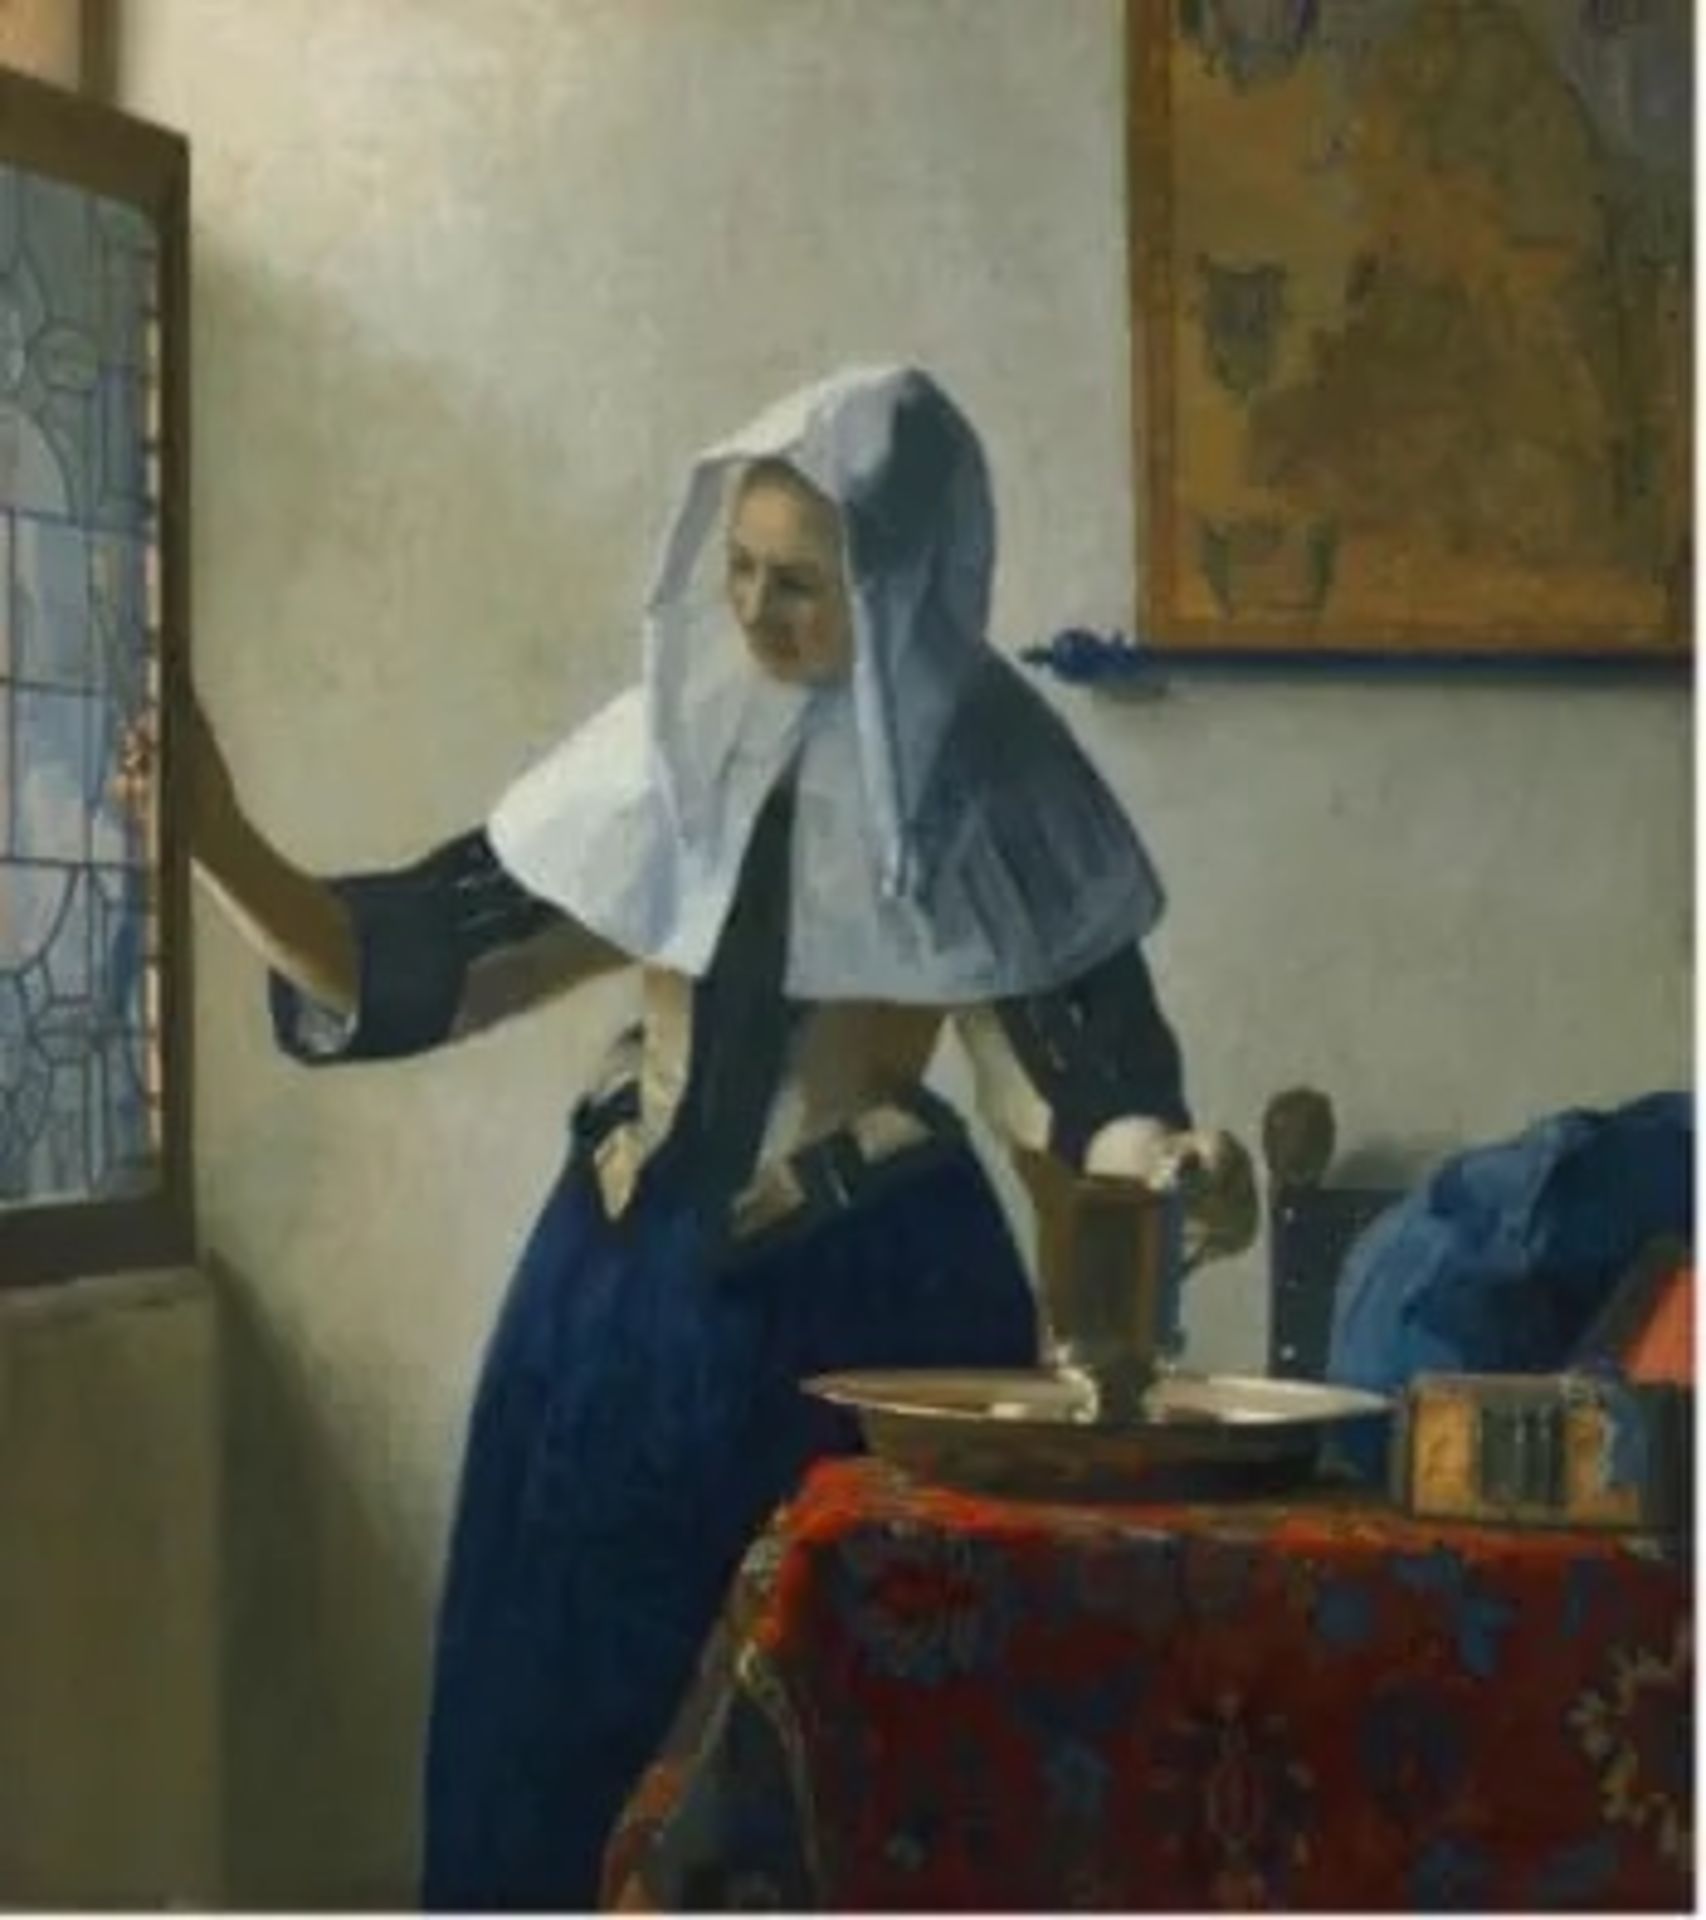 Johannes Vermeer "Young Woman with a Water Pitcher, 1662" Print